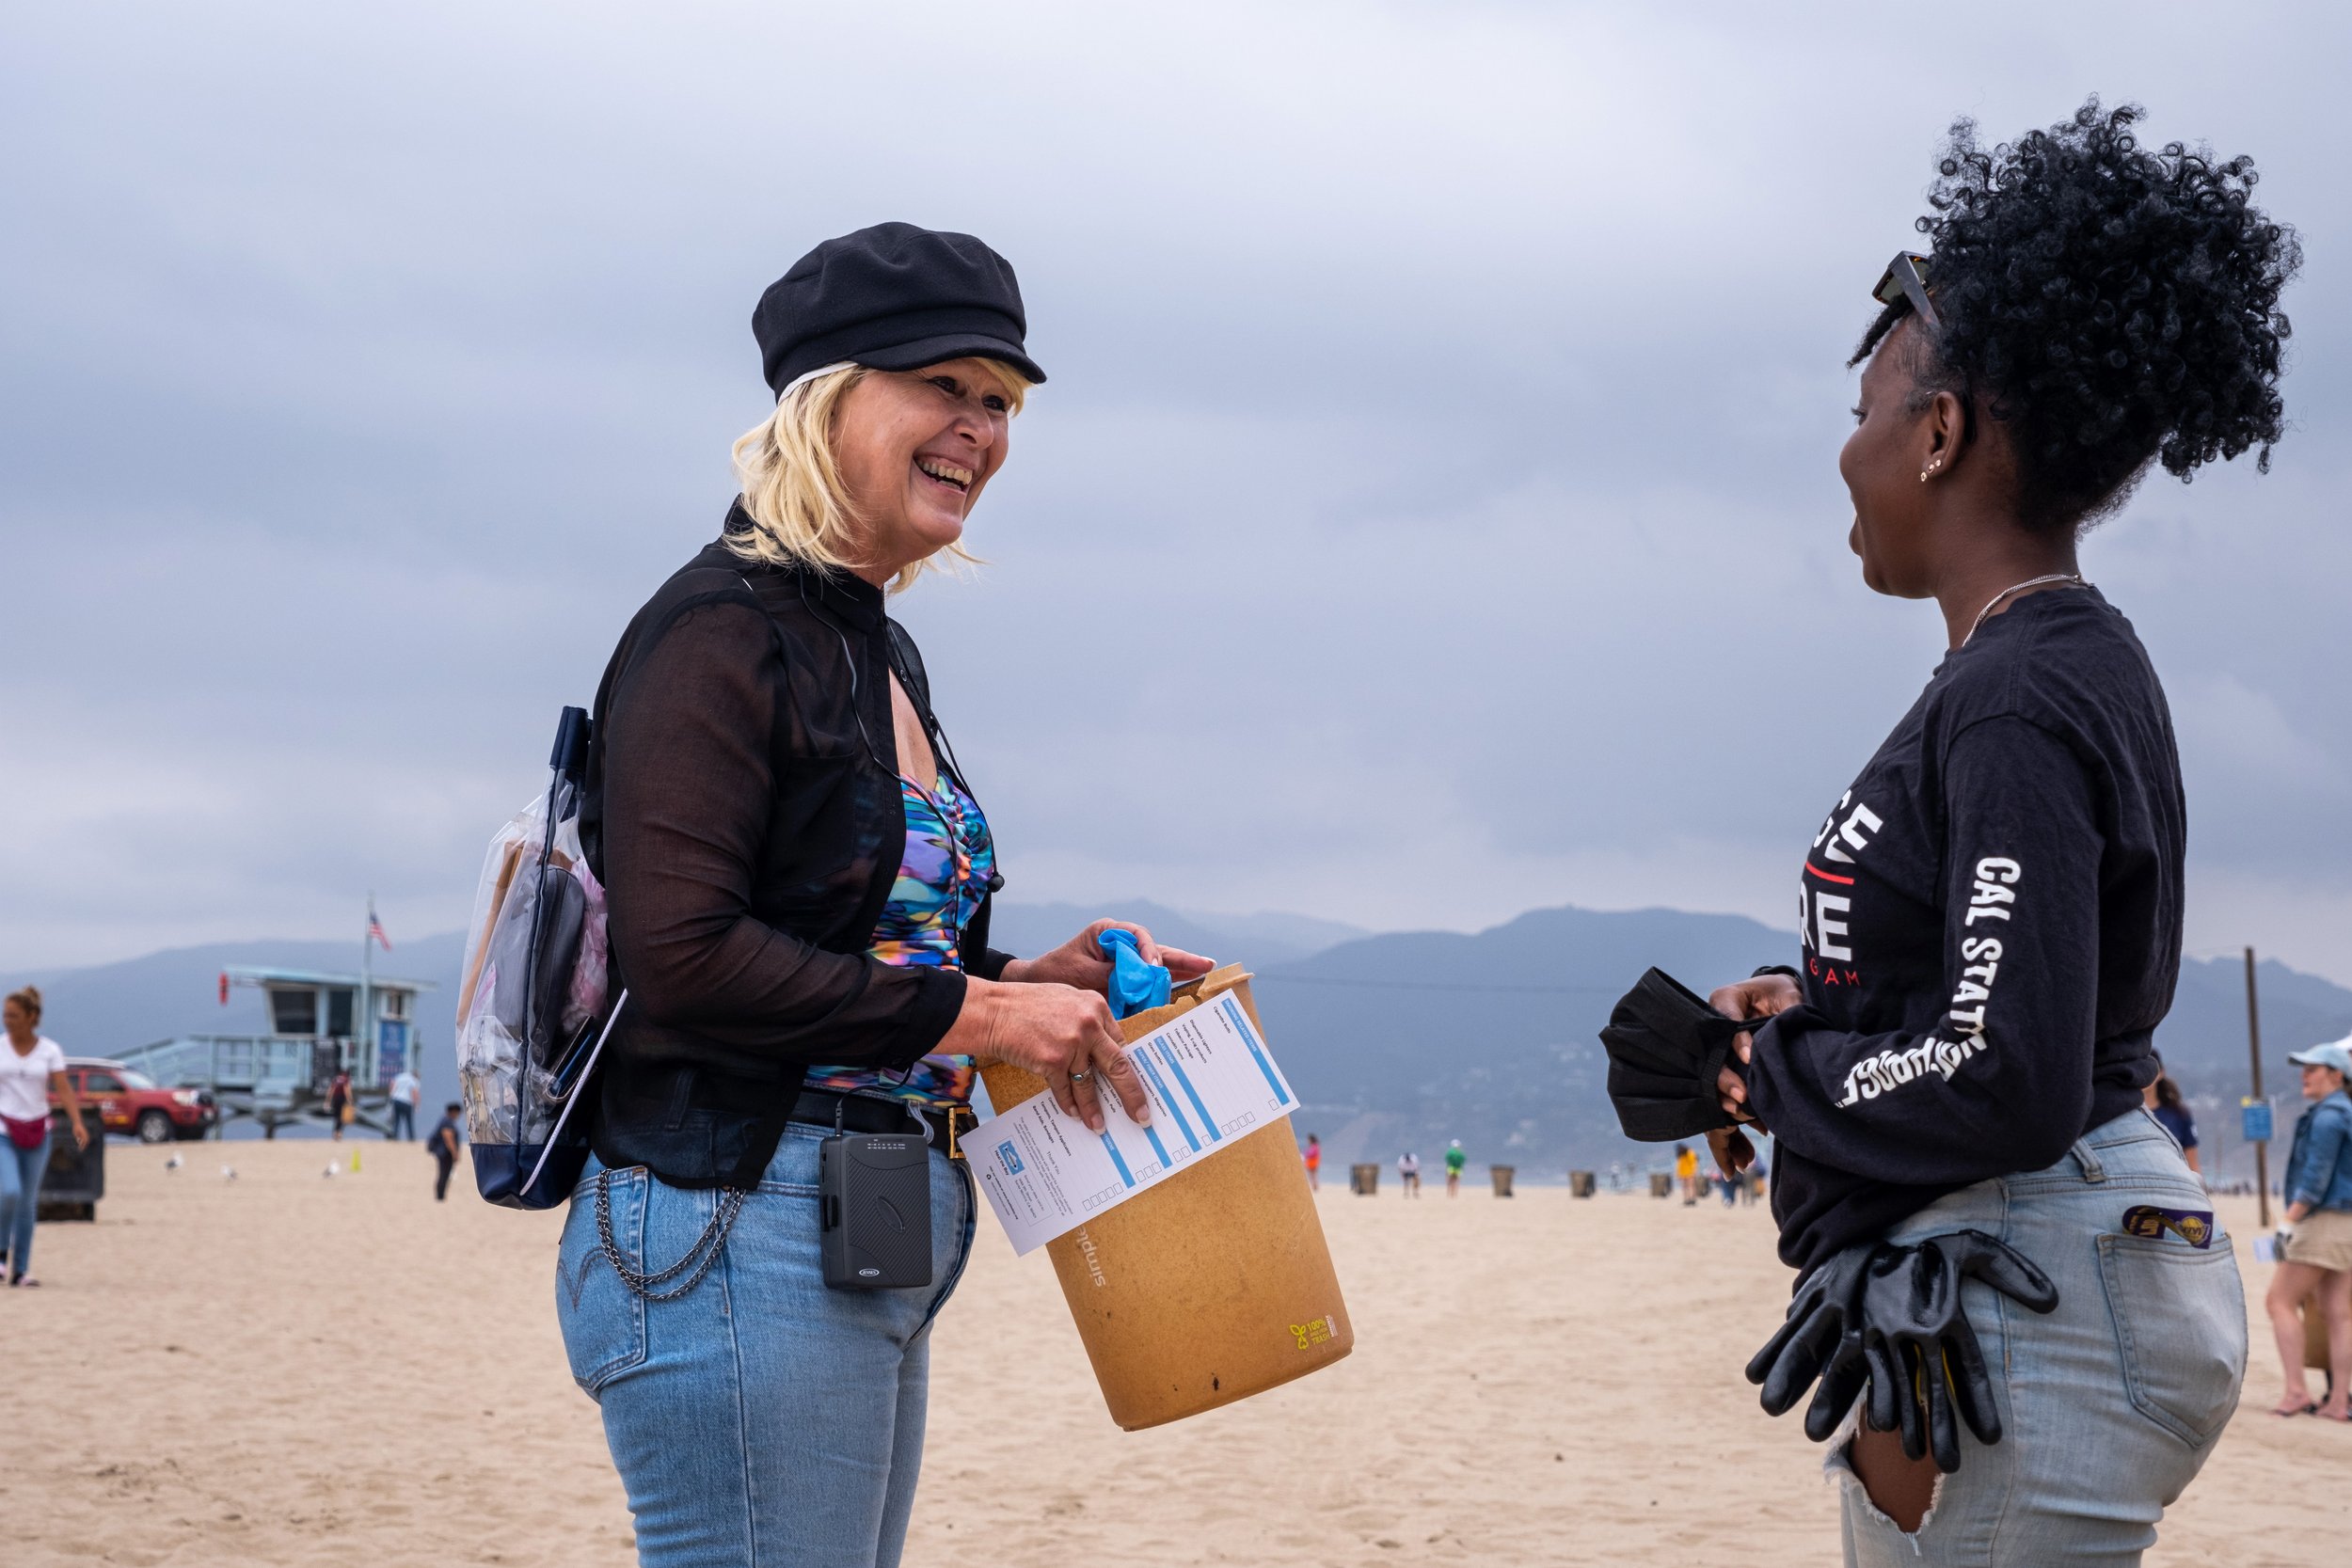  Joy De Vie has been coming to the beach cleanup since 2018. “I wish that corporations would stop producing microplastics. The way they manufacture products should be more ocean-friendly. For as much money as they make, they should spend the extra do